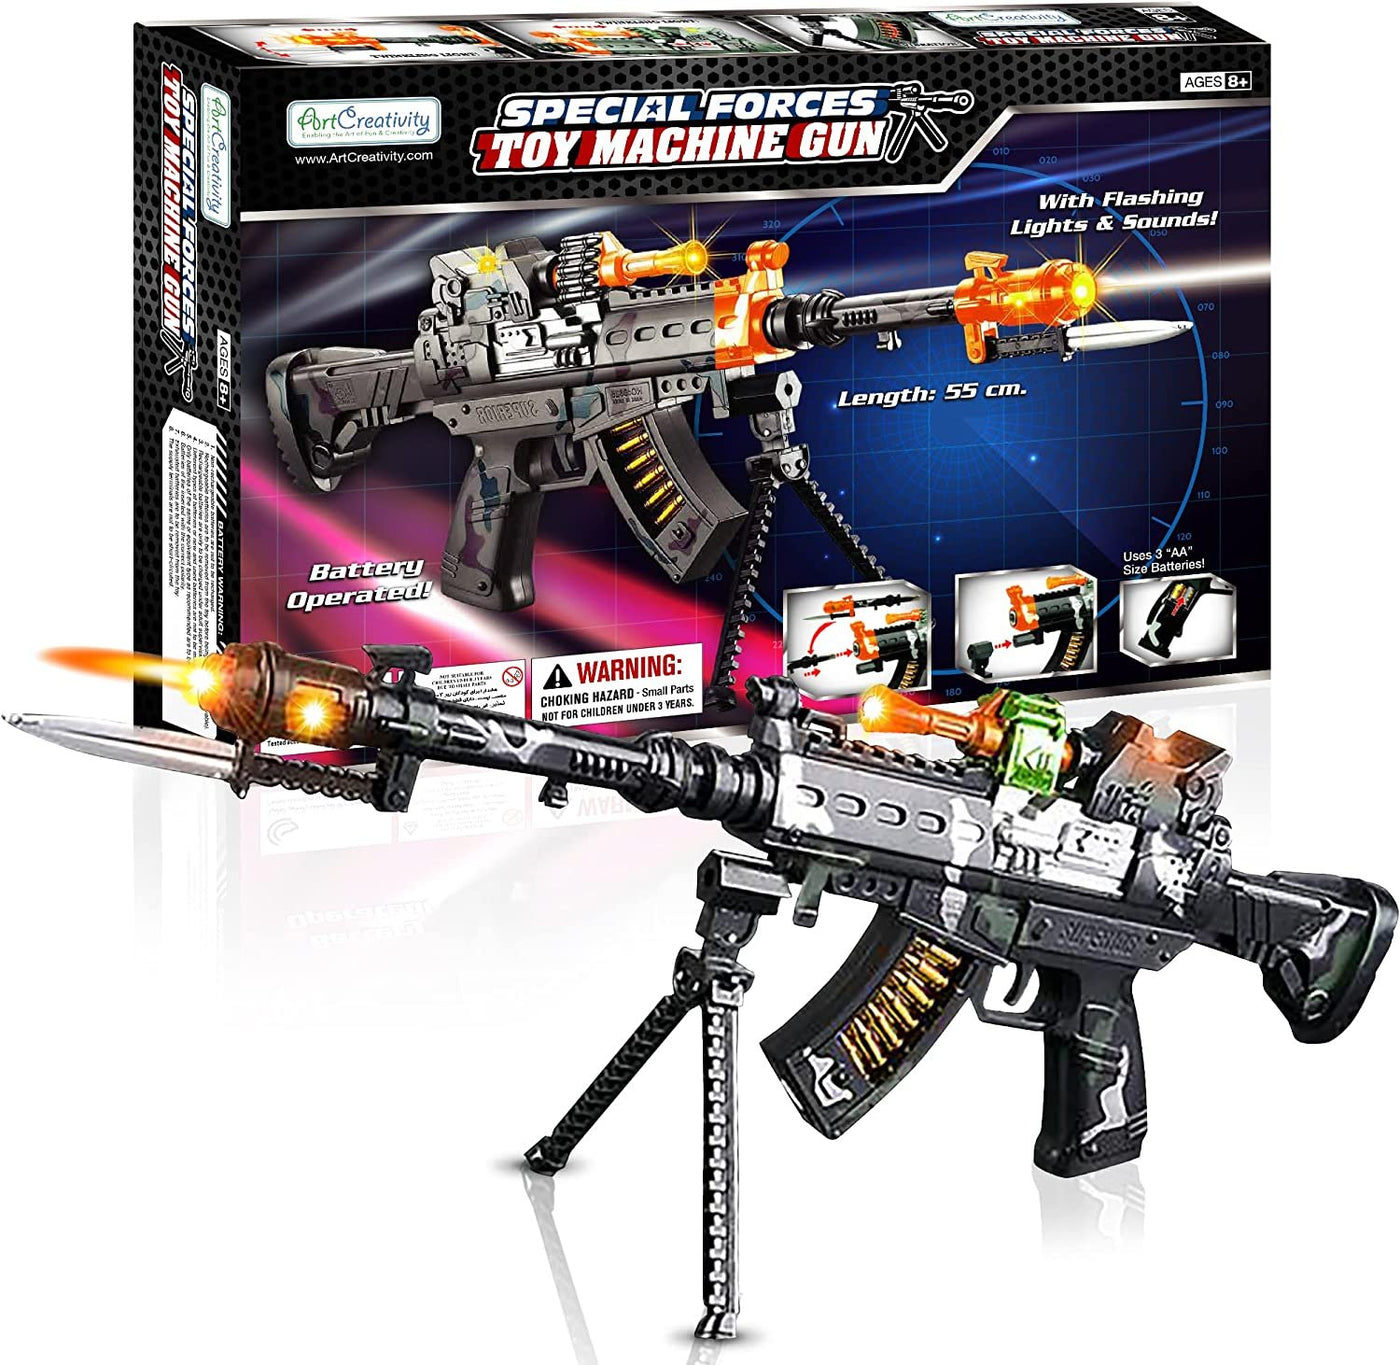 Special Forces Toy Machine Gun with LEDs, Sound & Bayonet